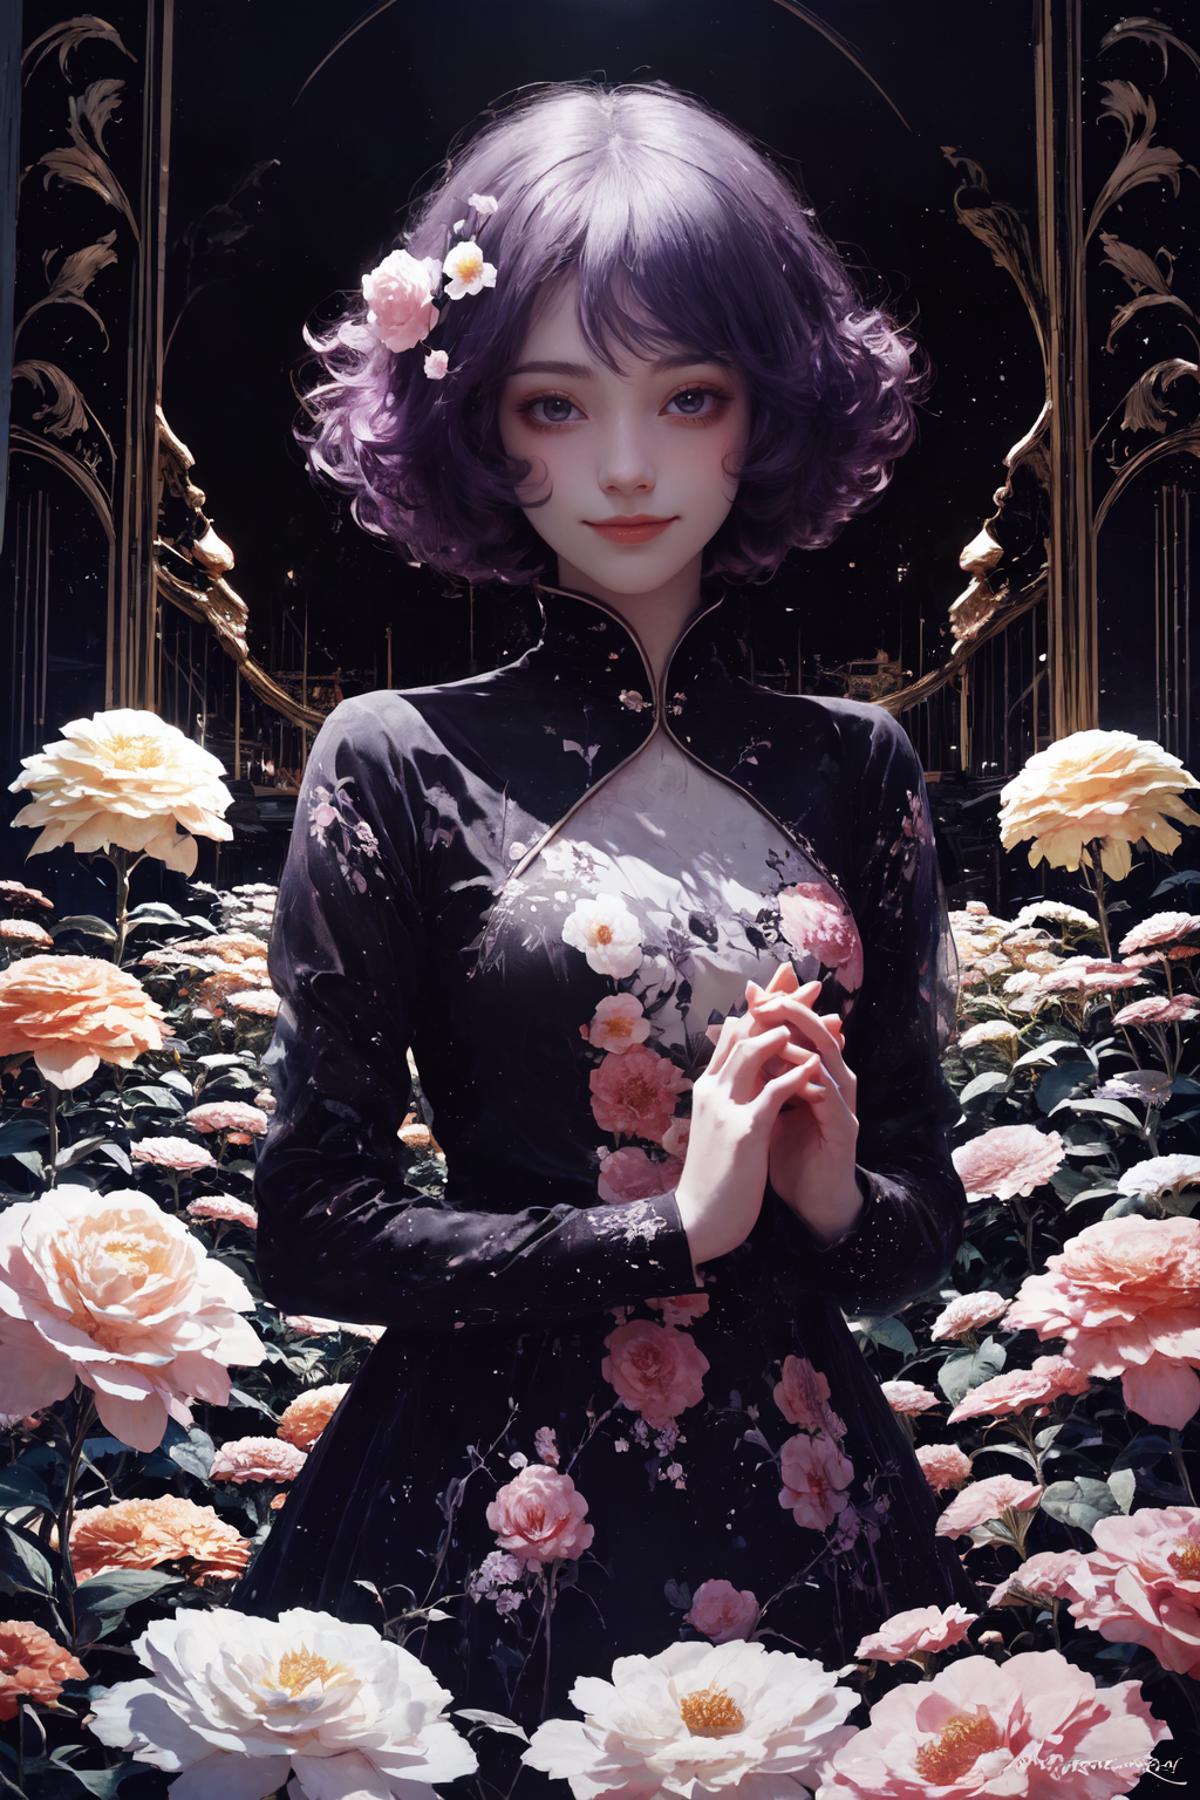 A woman with purple hair wearing a black dress with a floral design.